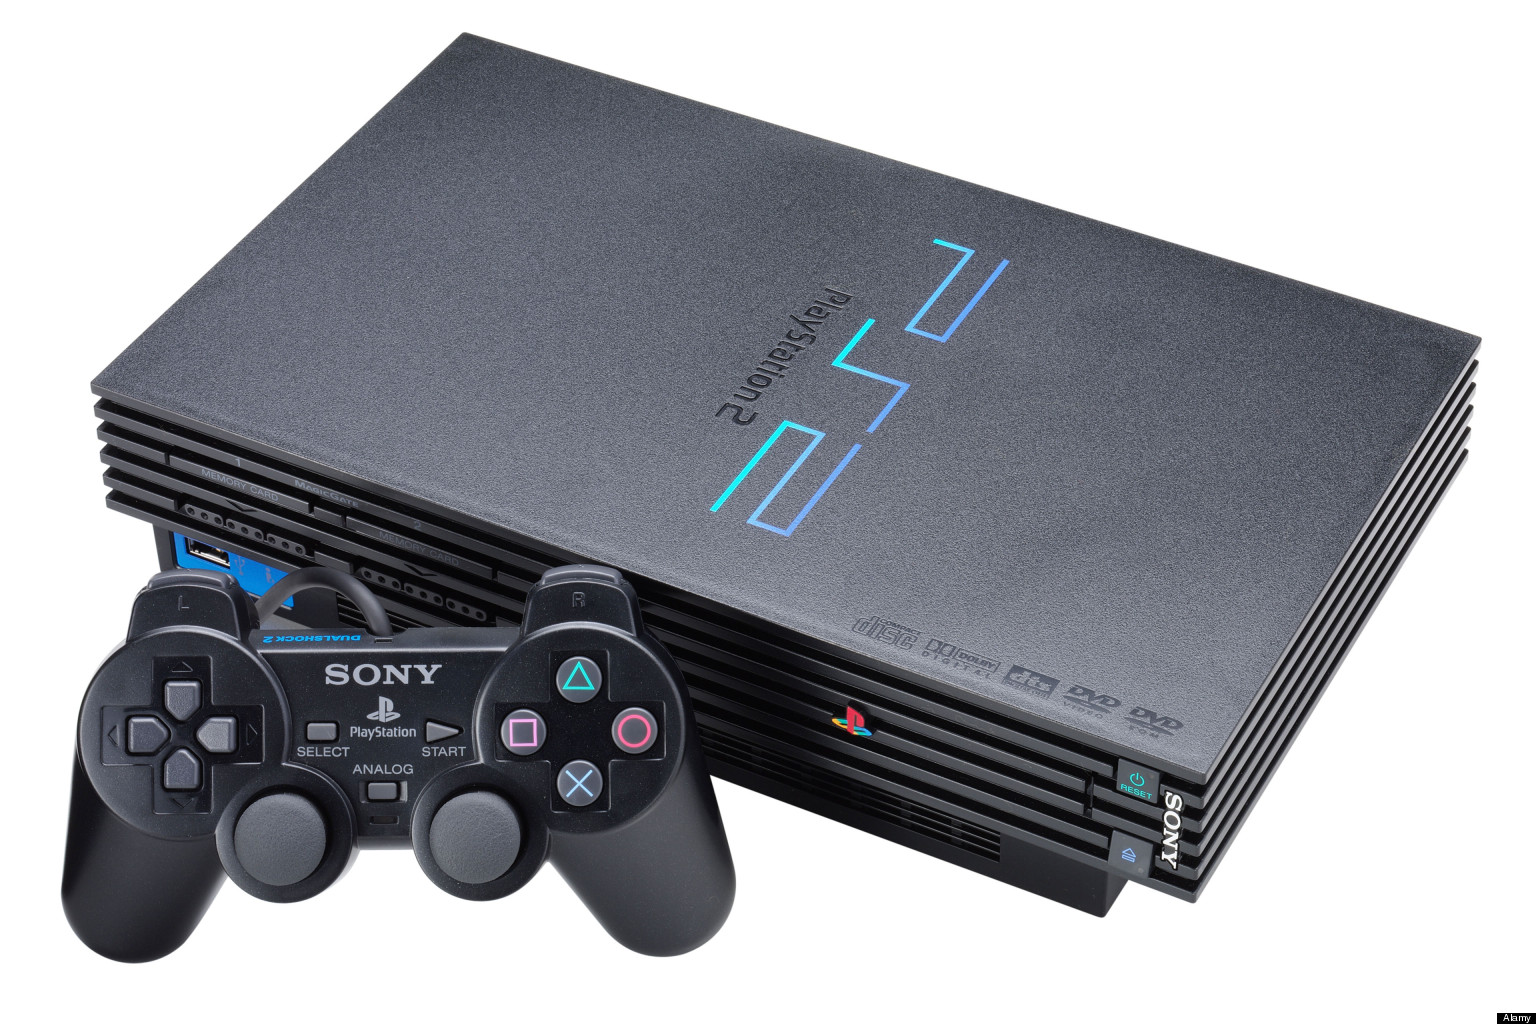 PlayStation 2's chaotic Japanese launch was 20 years ago today